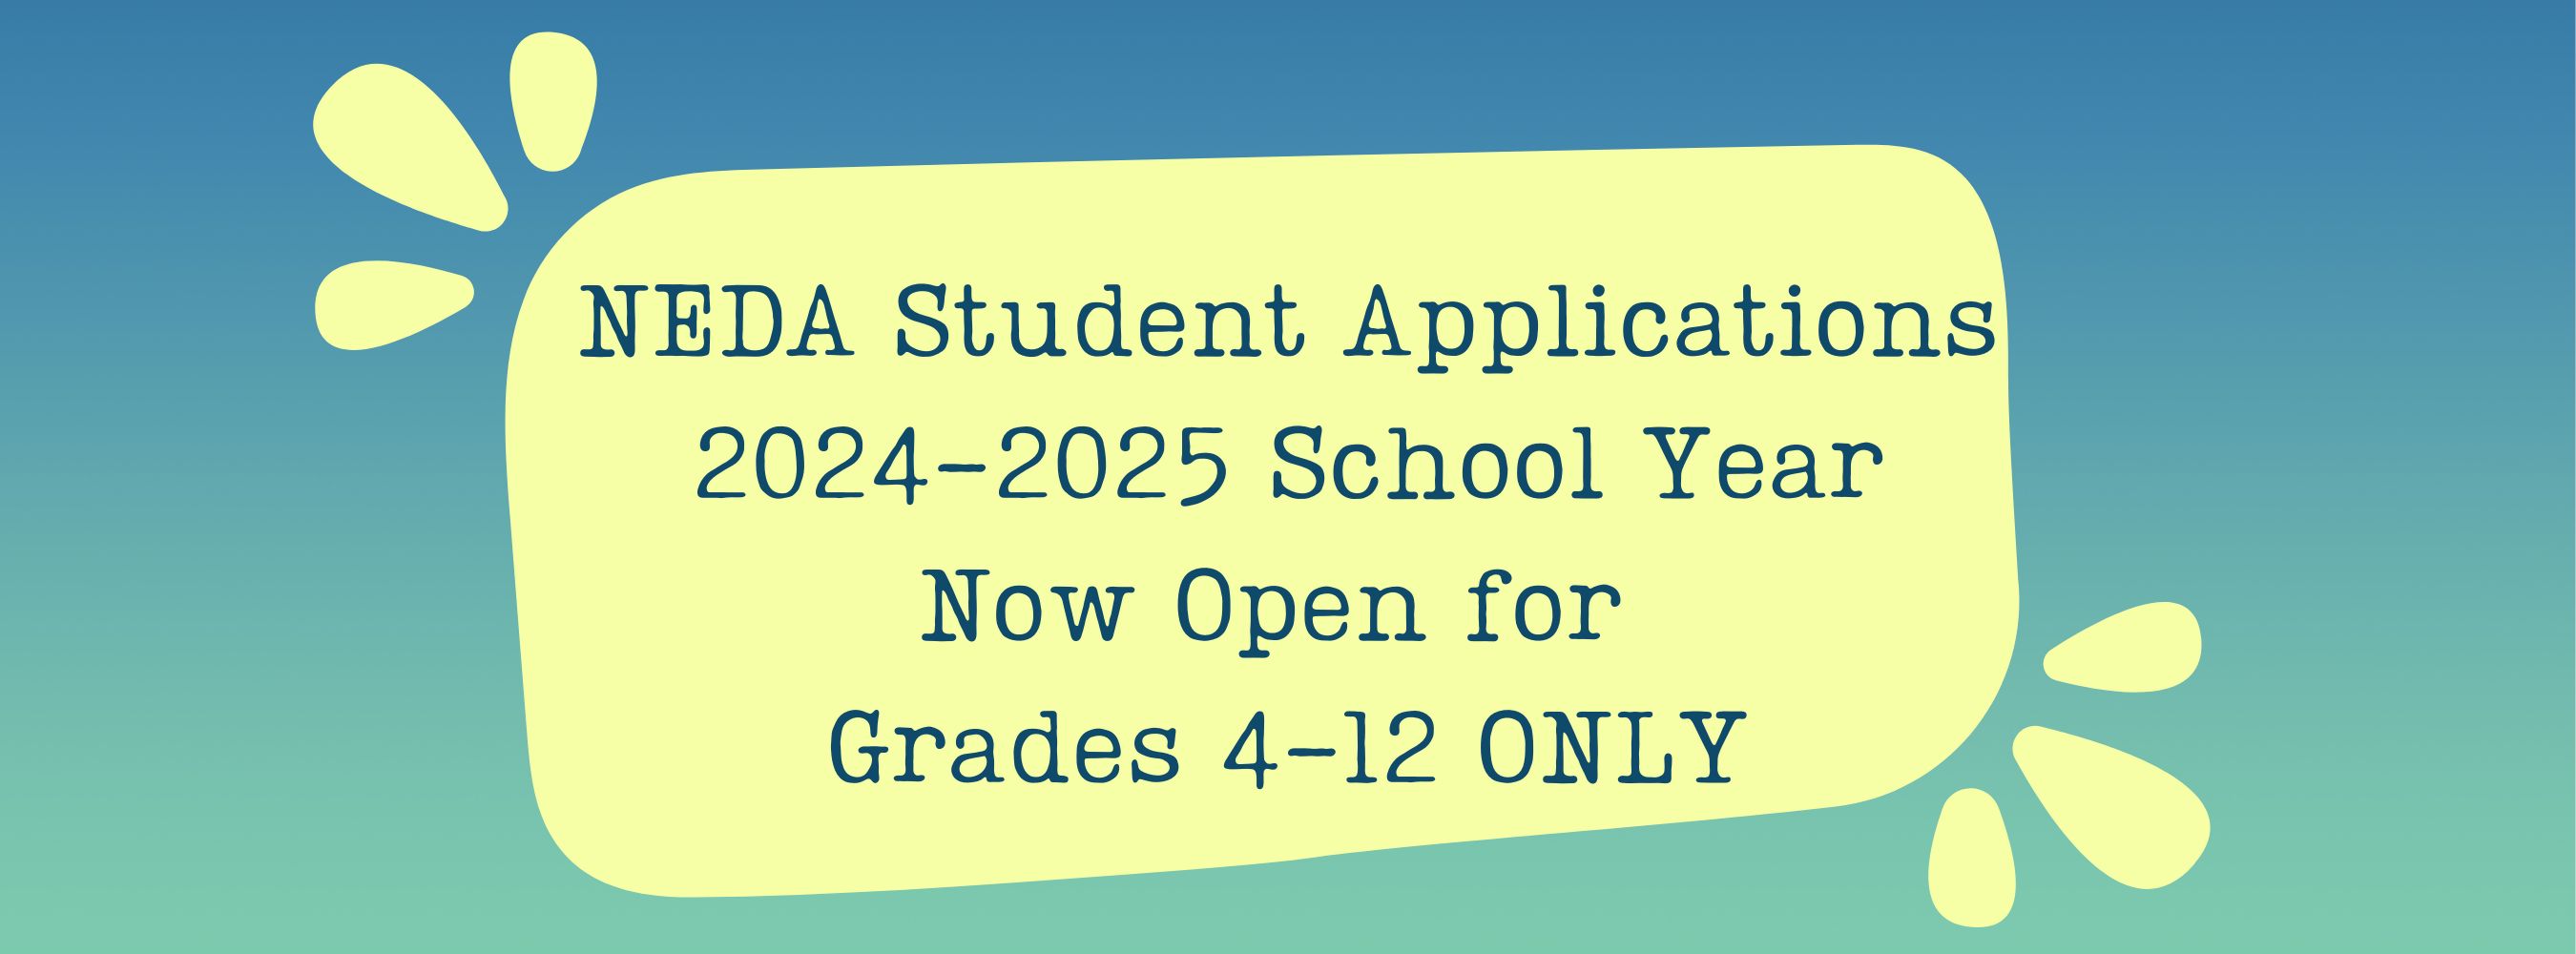 NEDA Applications Now open grades 4-12 only